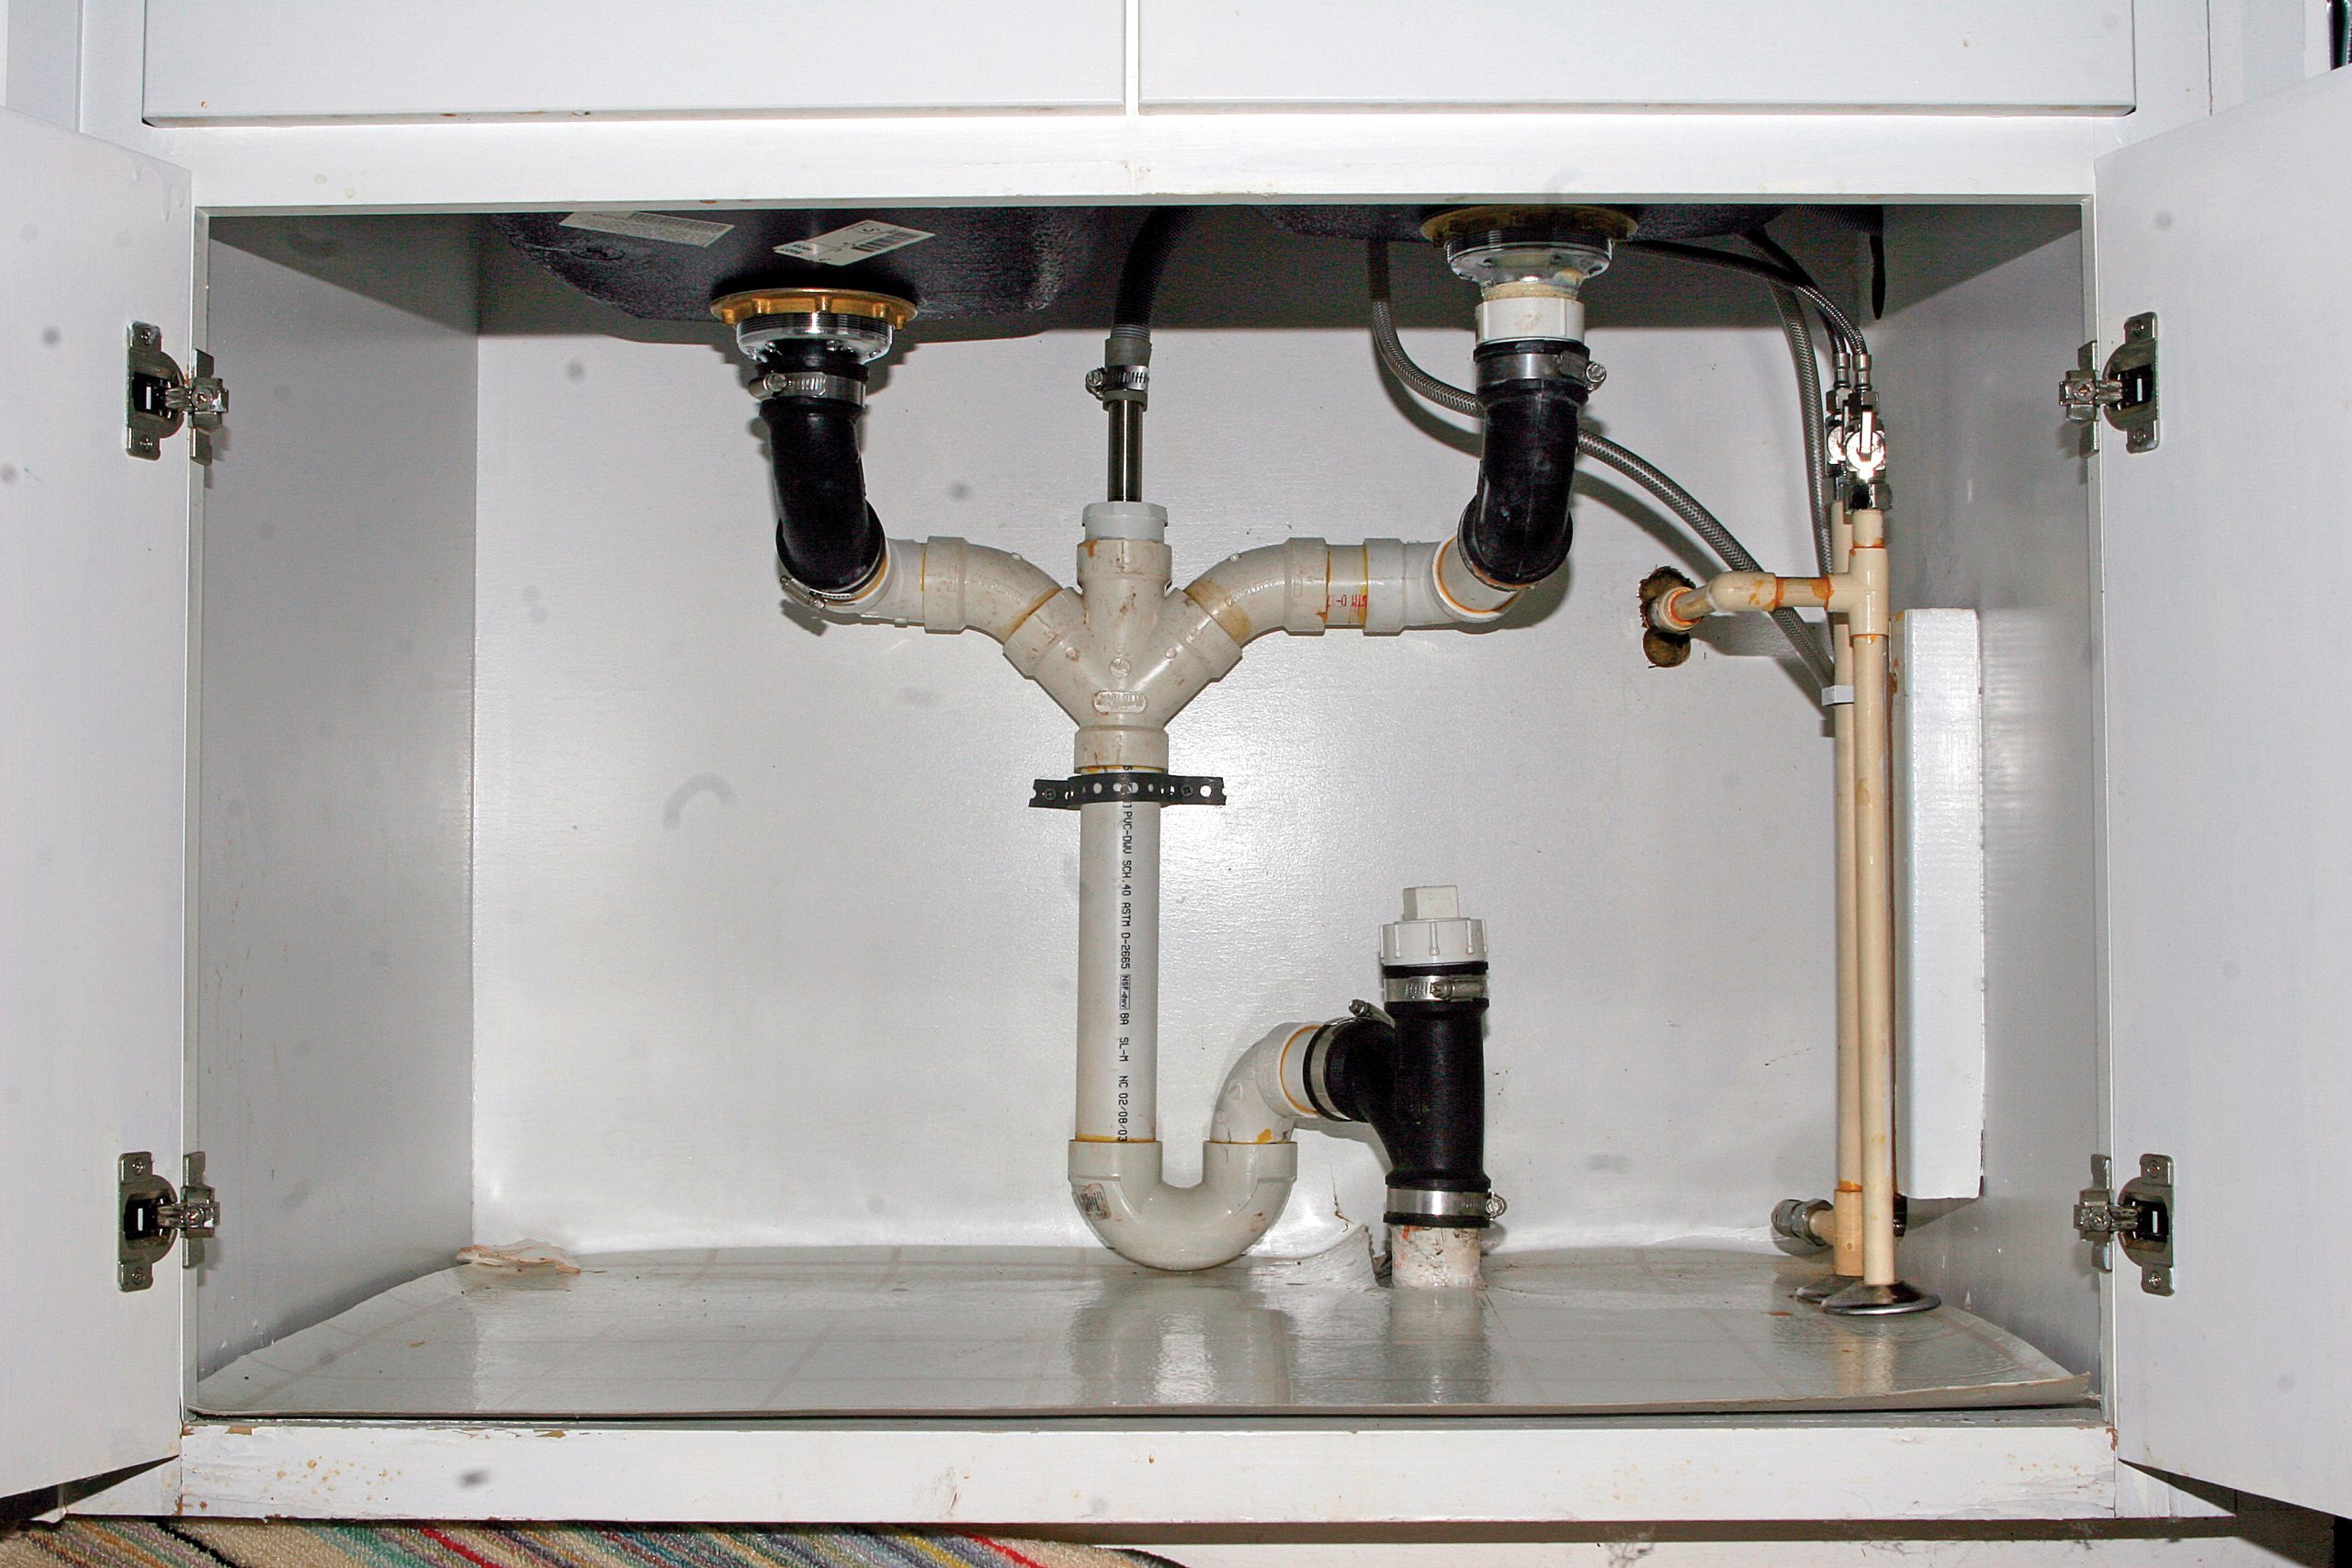 How to Seal Plumbing Pipes Under Sink: A Guide - R.S. Andrews